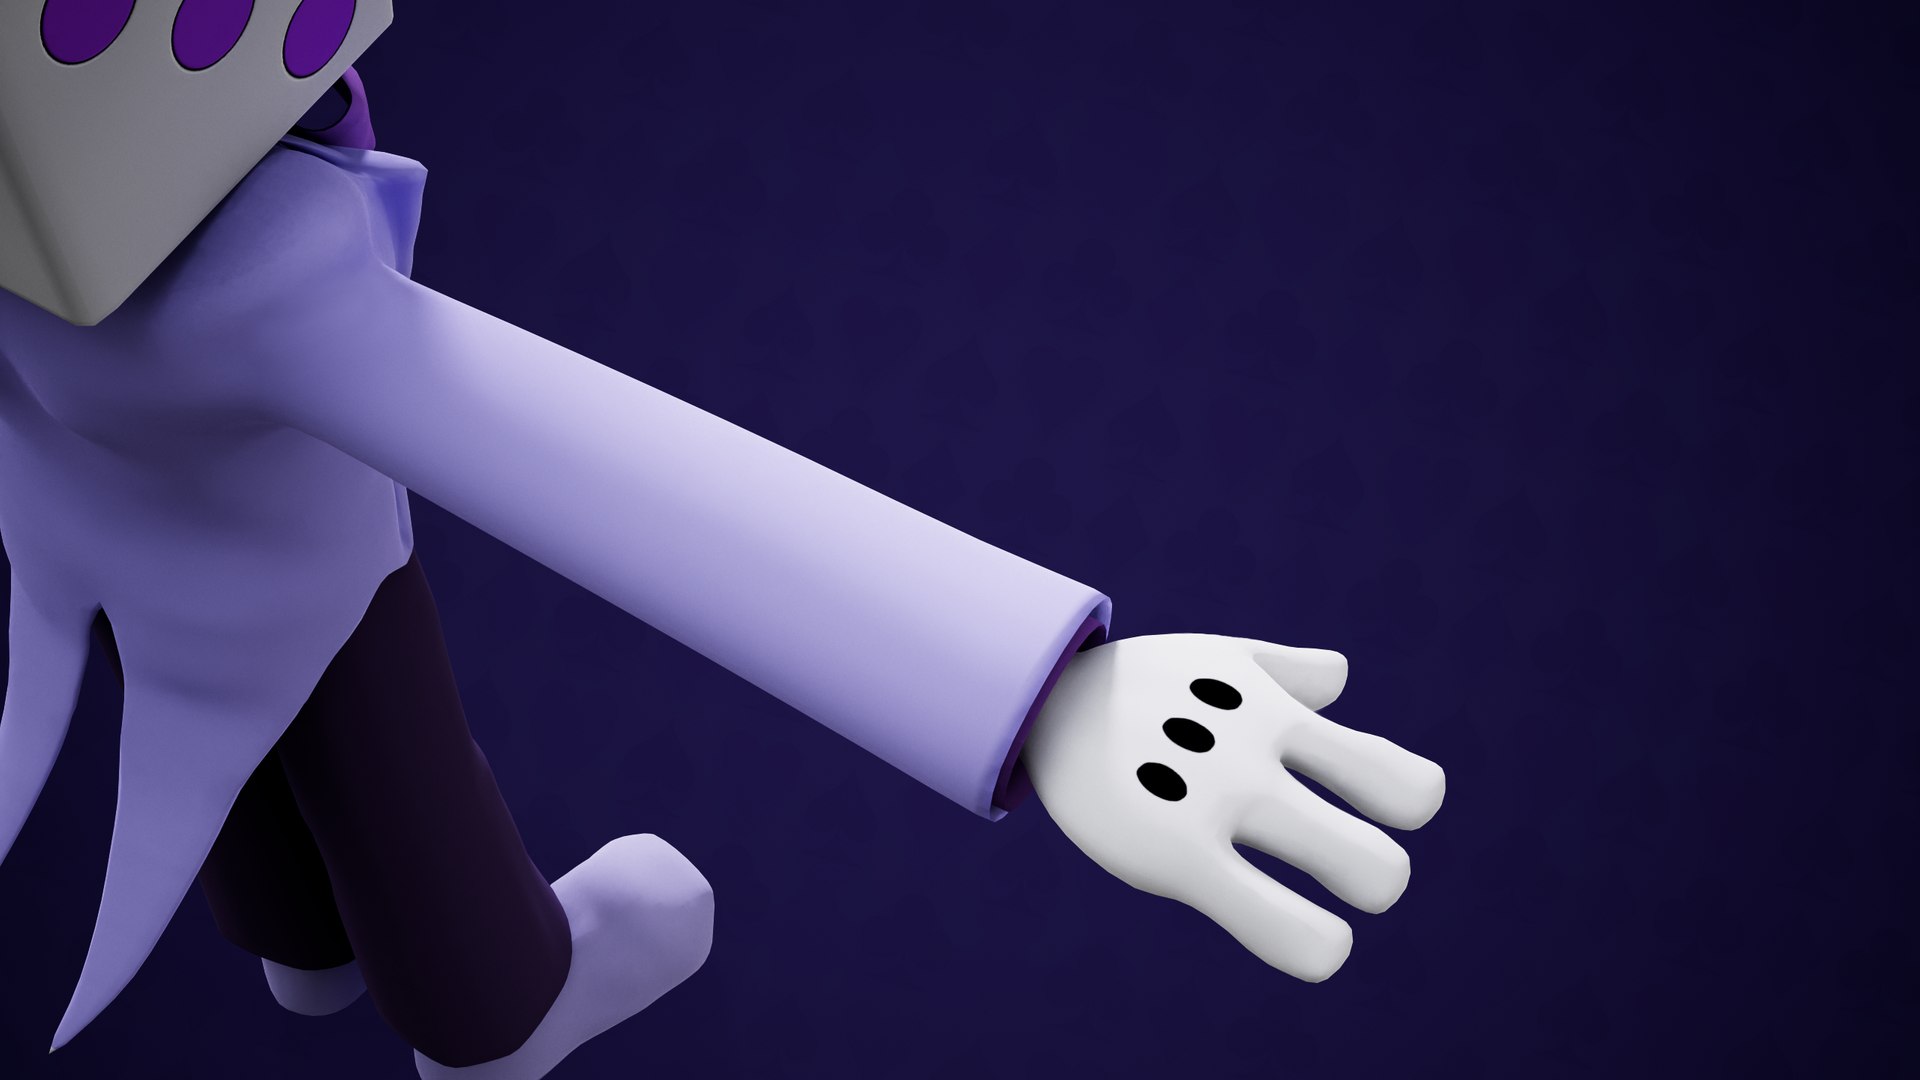 Been working on this 3D King Dice for 4+ hours, while it isn't